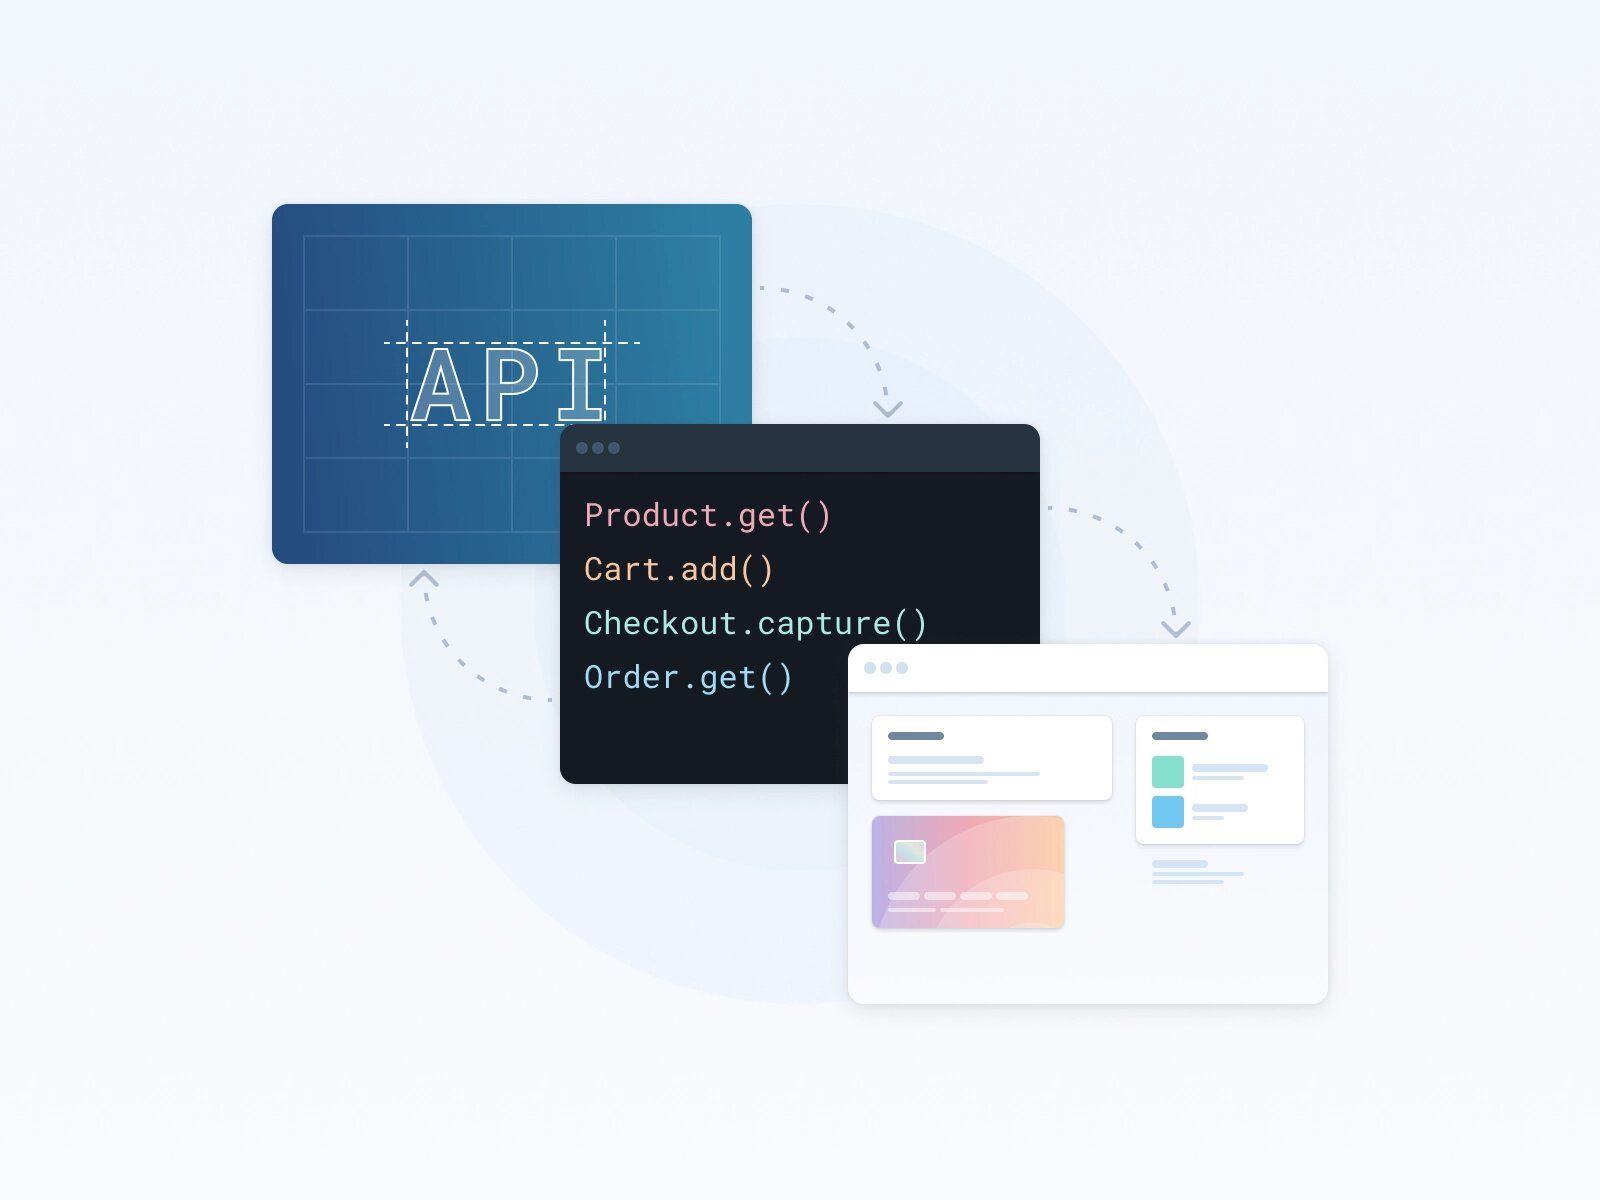 As an experienced Tech Partner in SaaS software development, we’ve taken over several SaaS applications to finish up as well as to rewrite, and we’ll happily share this expertise with you! (*image by [blaze](https://dribbble.com/blaze){ rel="nofollow" target="_blank" .default-md}*)